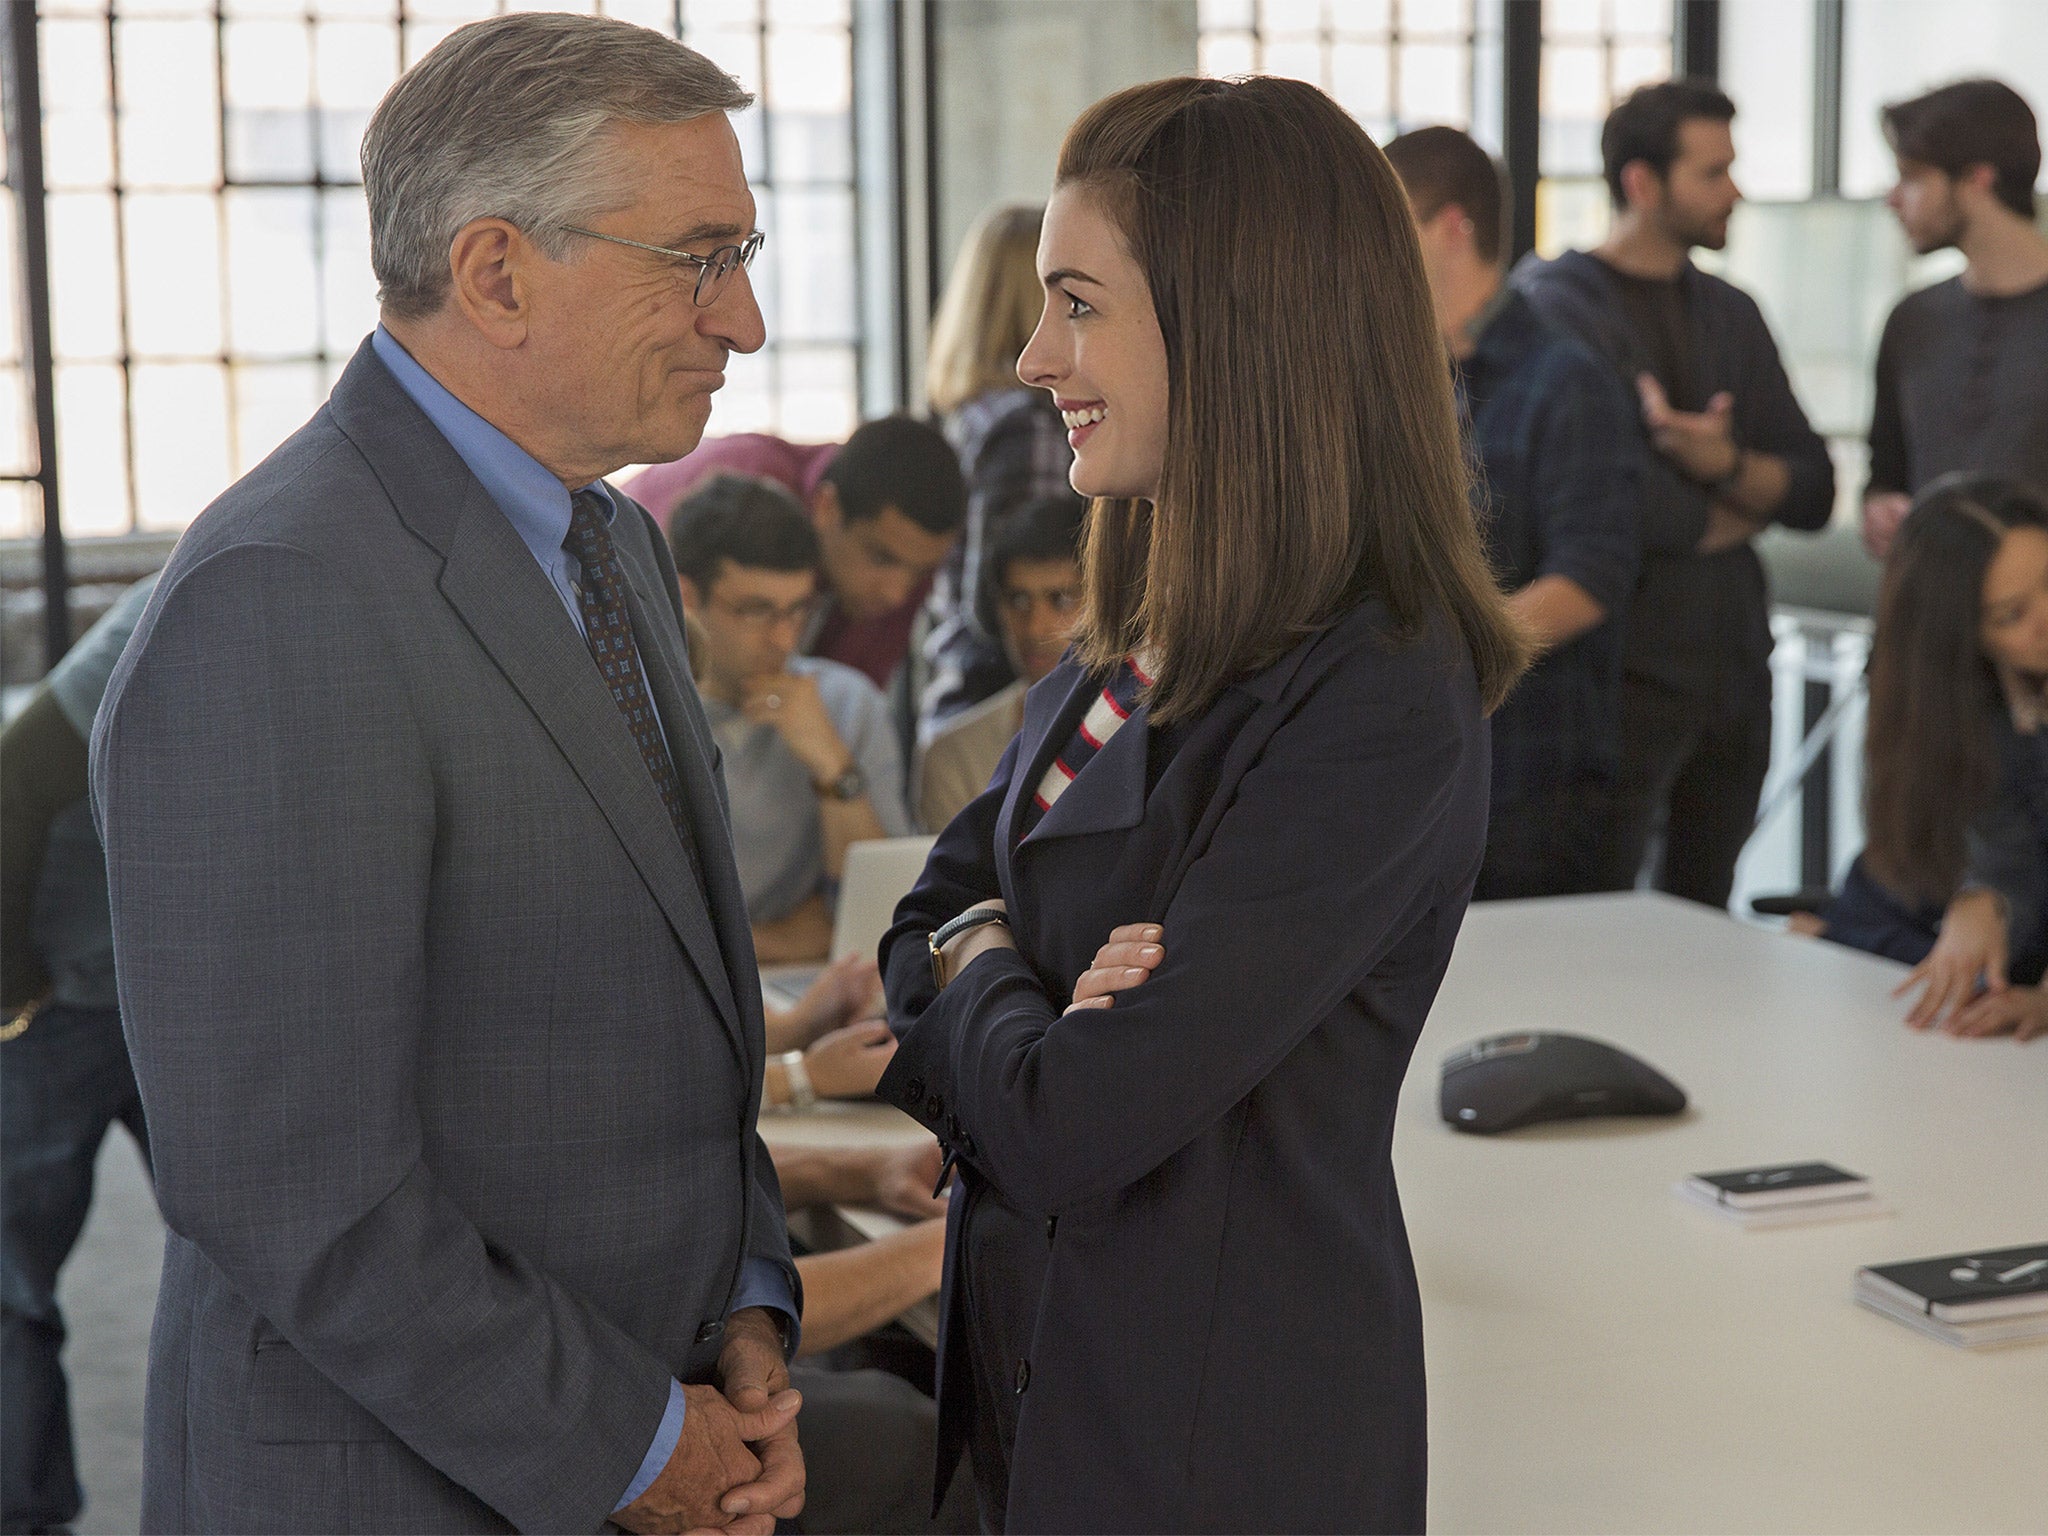 The Intern Robert De Niro and Anne Hathaway on age and the art of acting The Independent The Independent pic